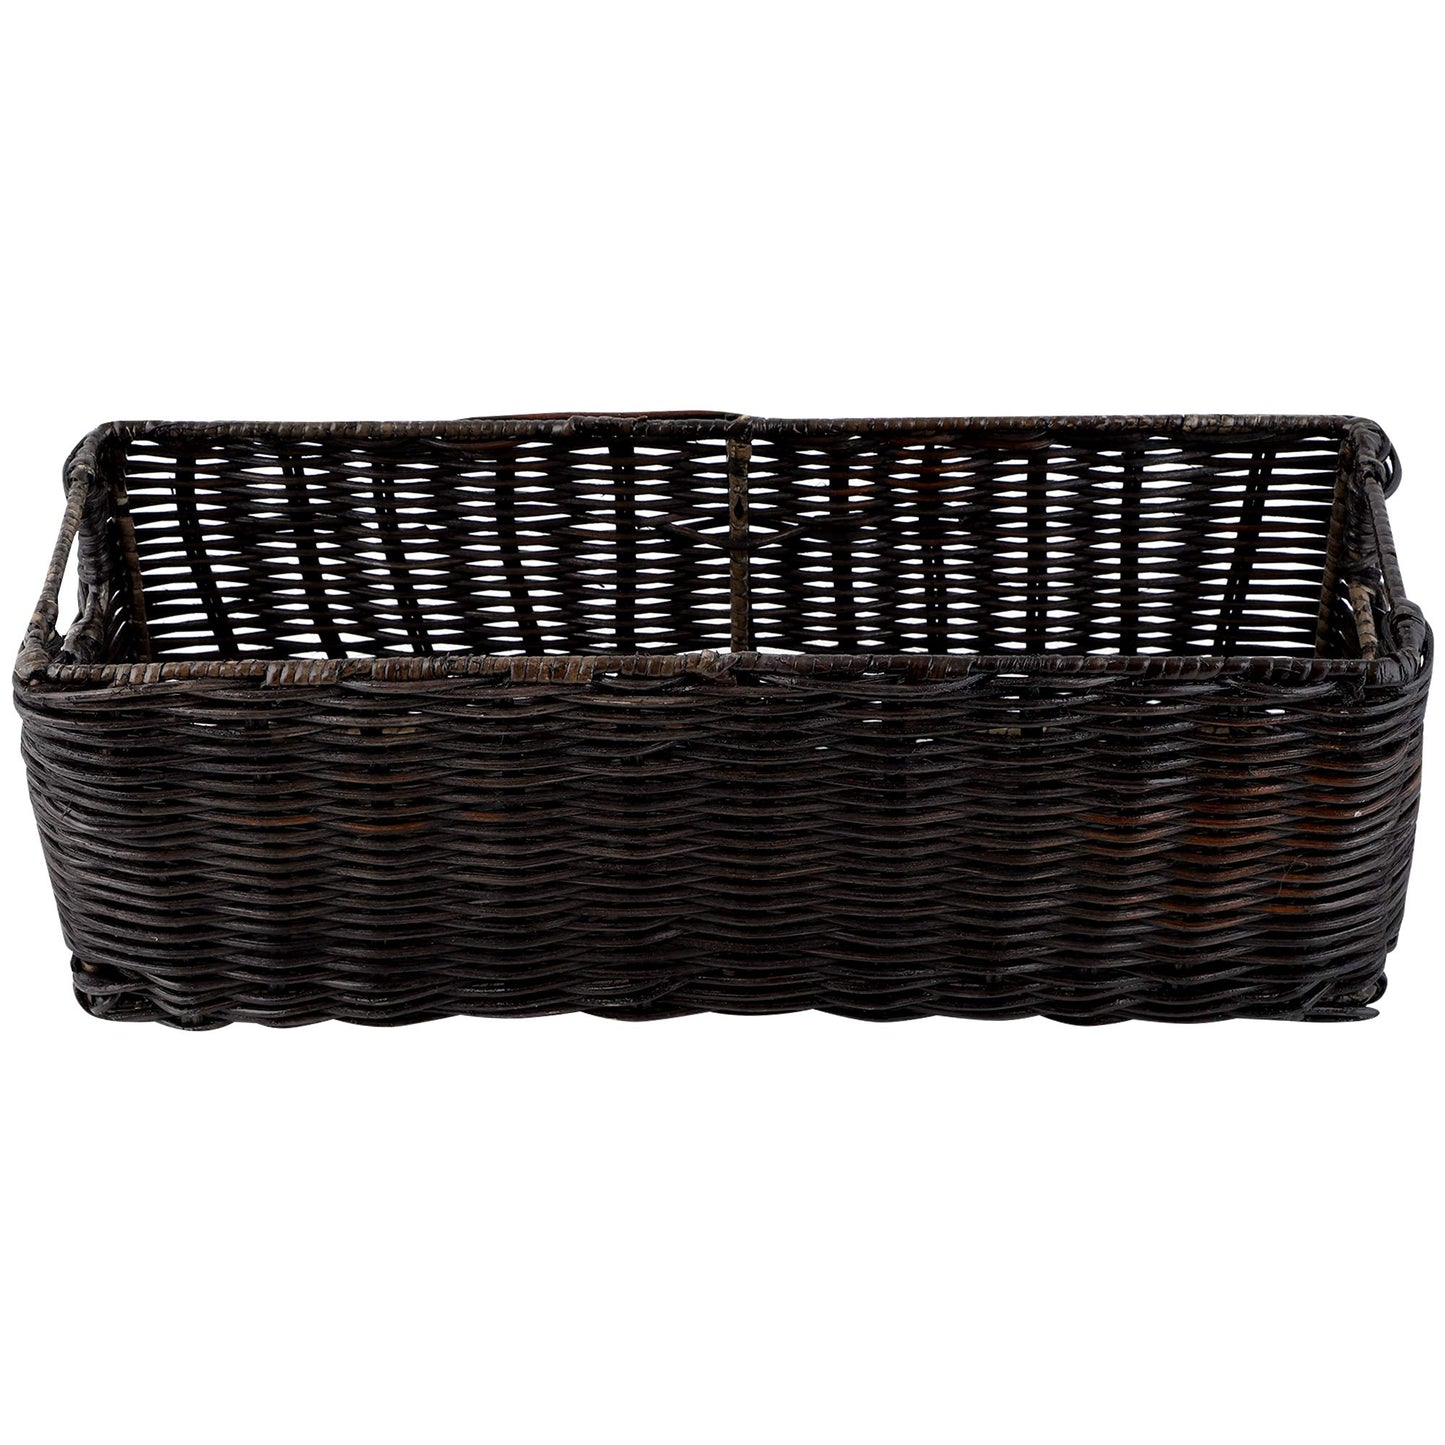 AKWAY Wicker Bathroom Vanity Tray for Toilet Paper and Soap, Kitchen Counter Top Storage Shelf Coffee Table Decorative Tray Cosmetic Organizer Display Holder (14 L x 4.5 W x 4.5 H, Antique Black) - Akway